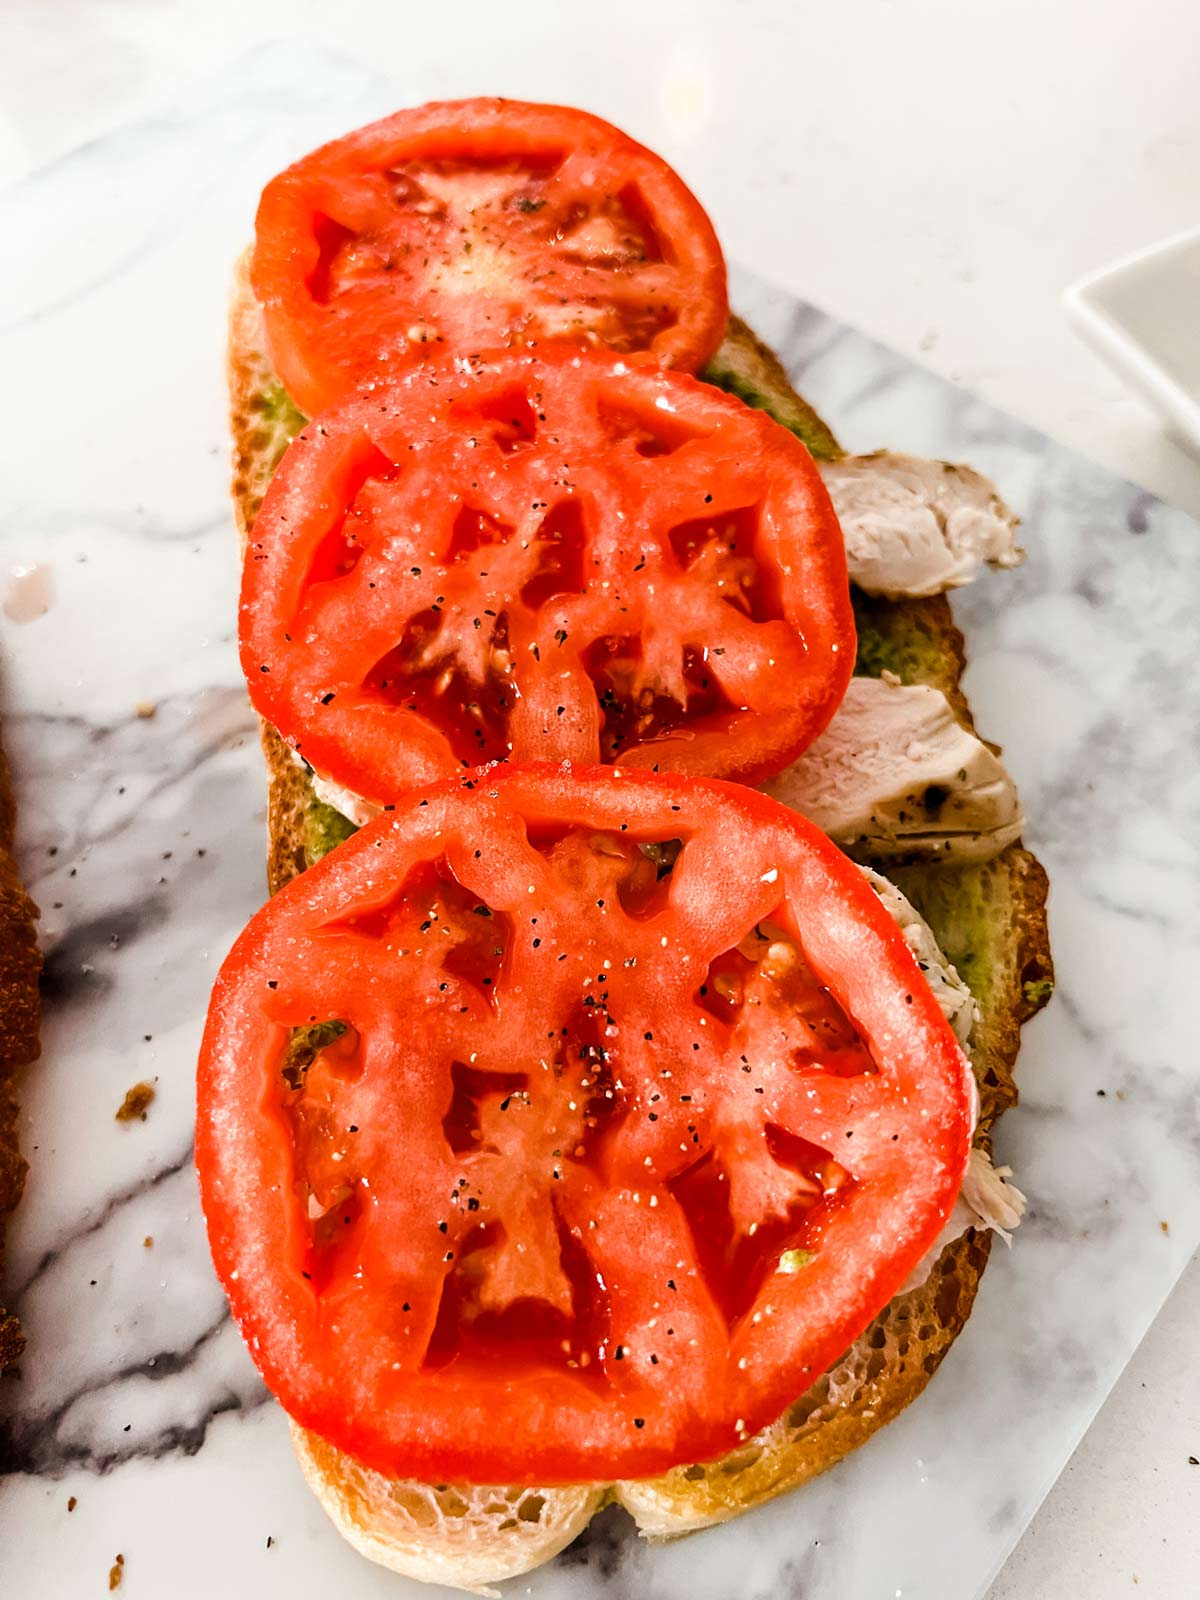 Pesto and sliced chicken topped with tomato on bread.